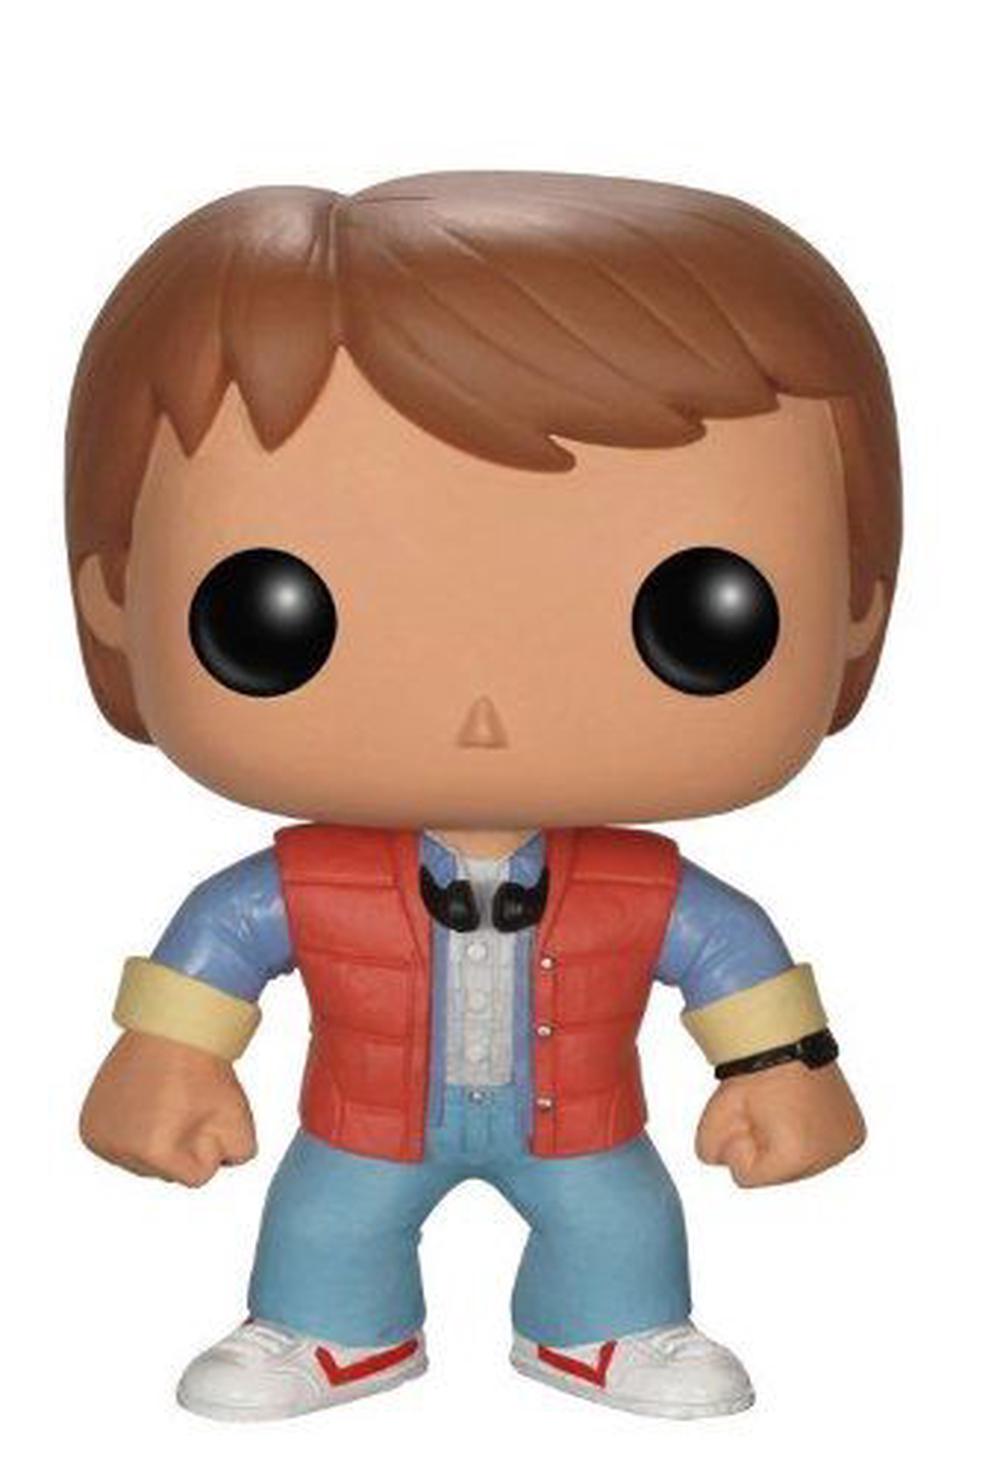 FunKo Marty Back to The Future Pop! Vinyl Figure Buy online at The Nile